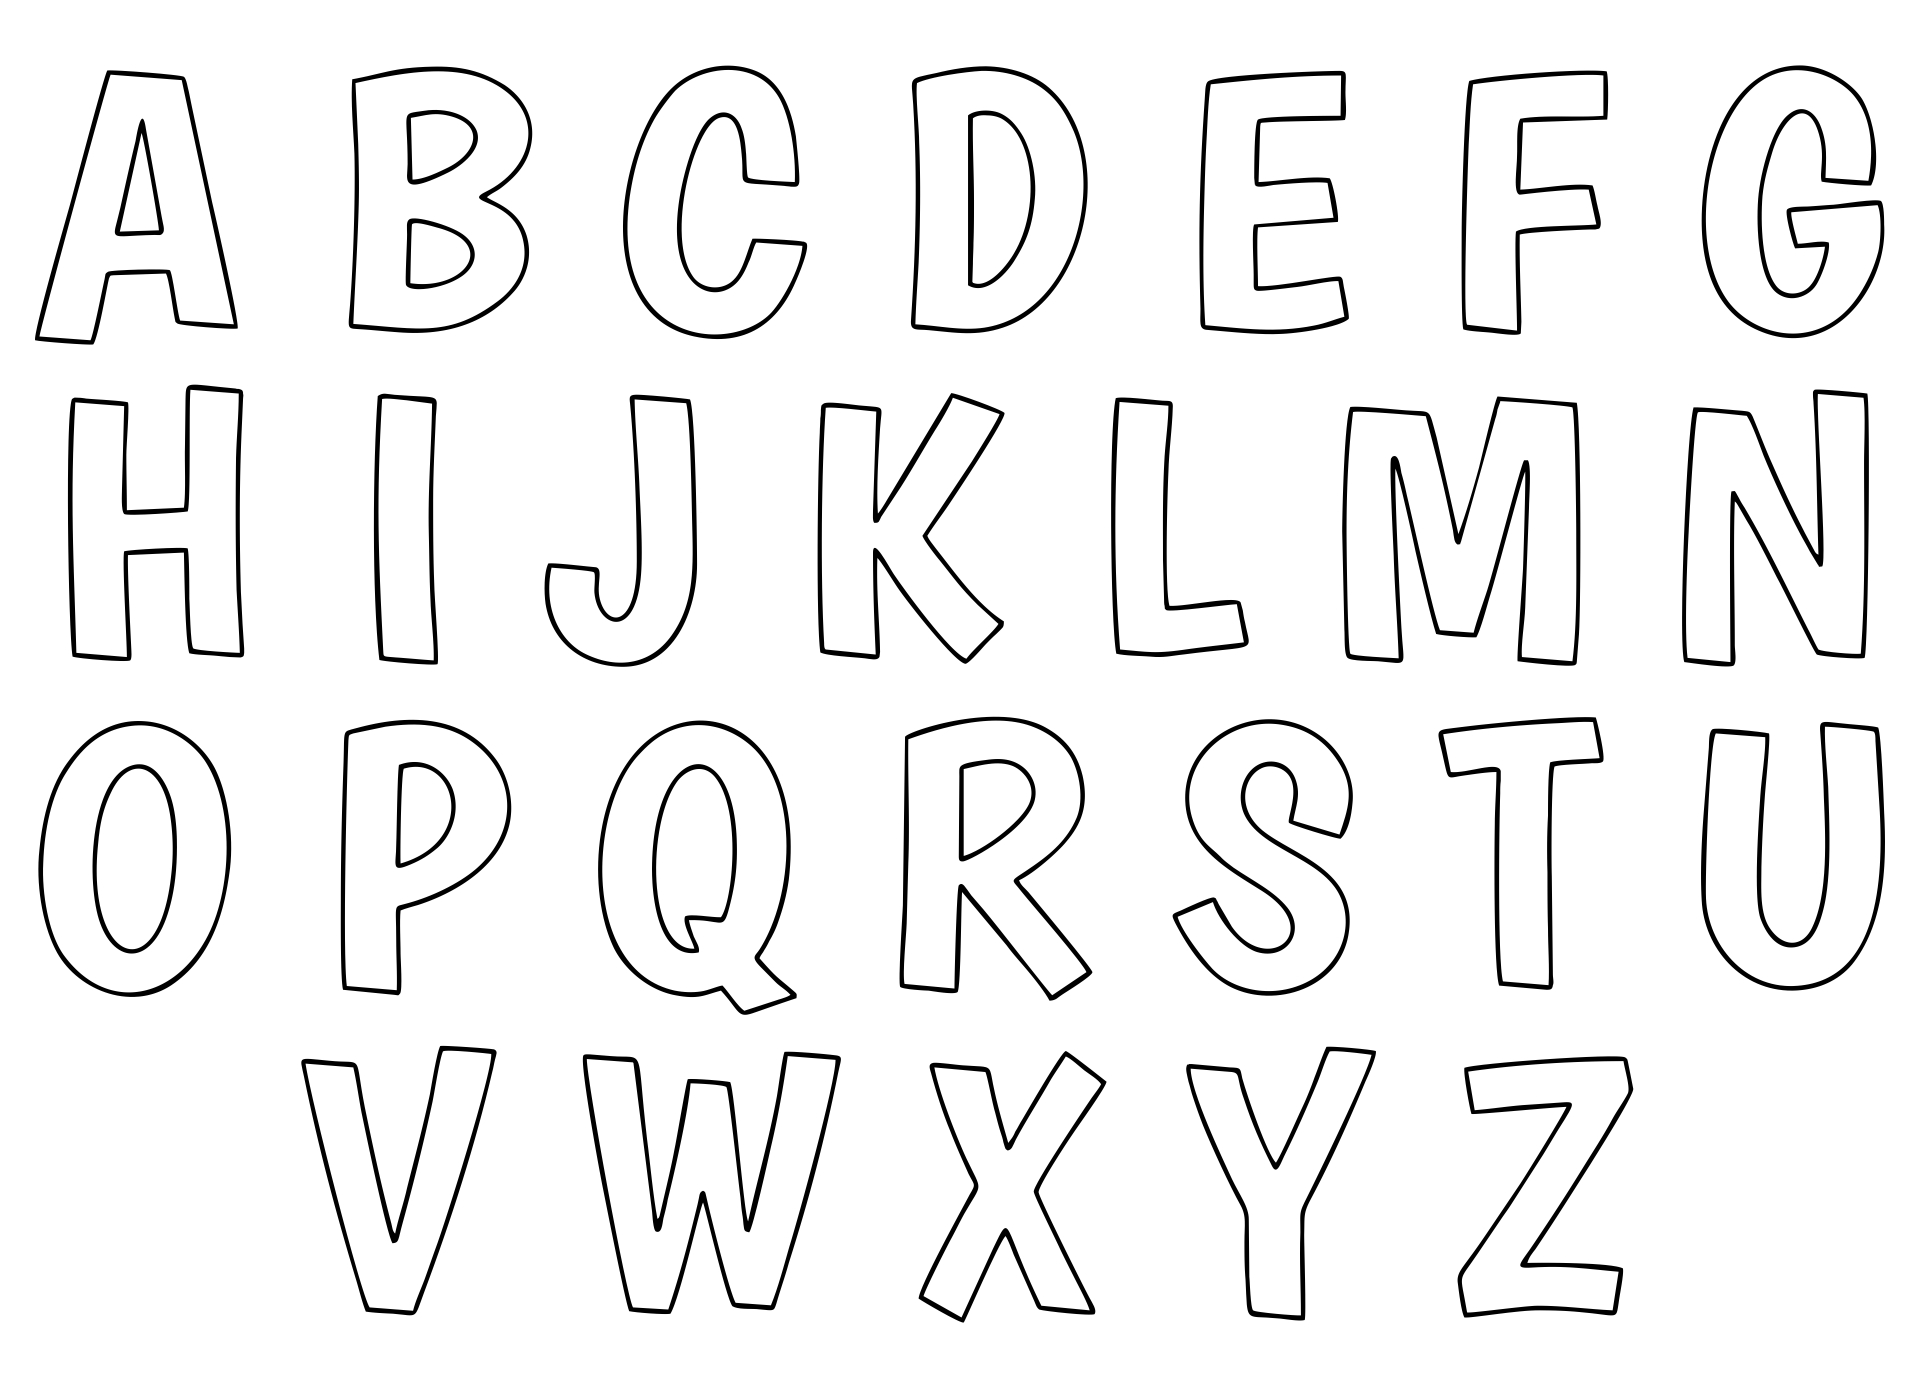 9 Best Images of 2 Inch Alphabet Letters Printable Small Alphabet